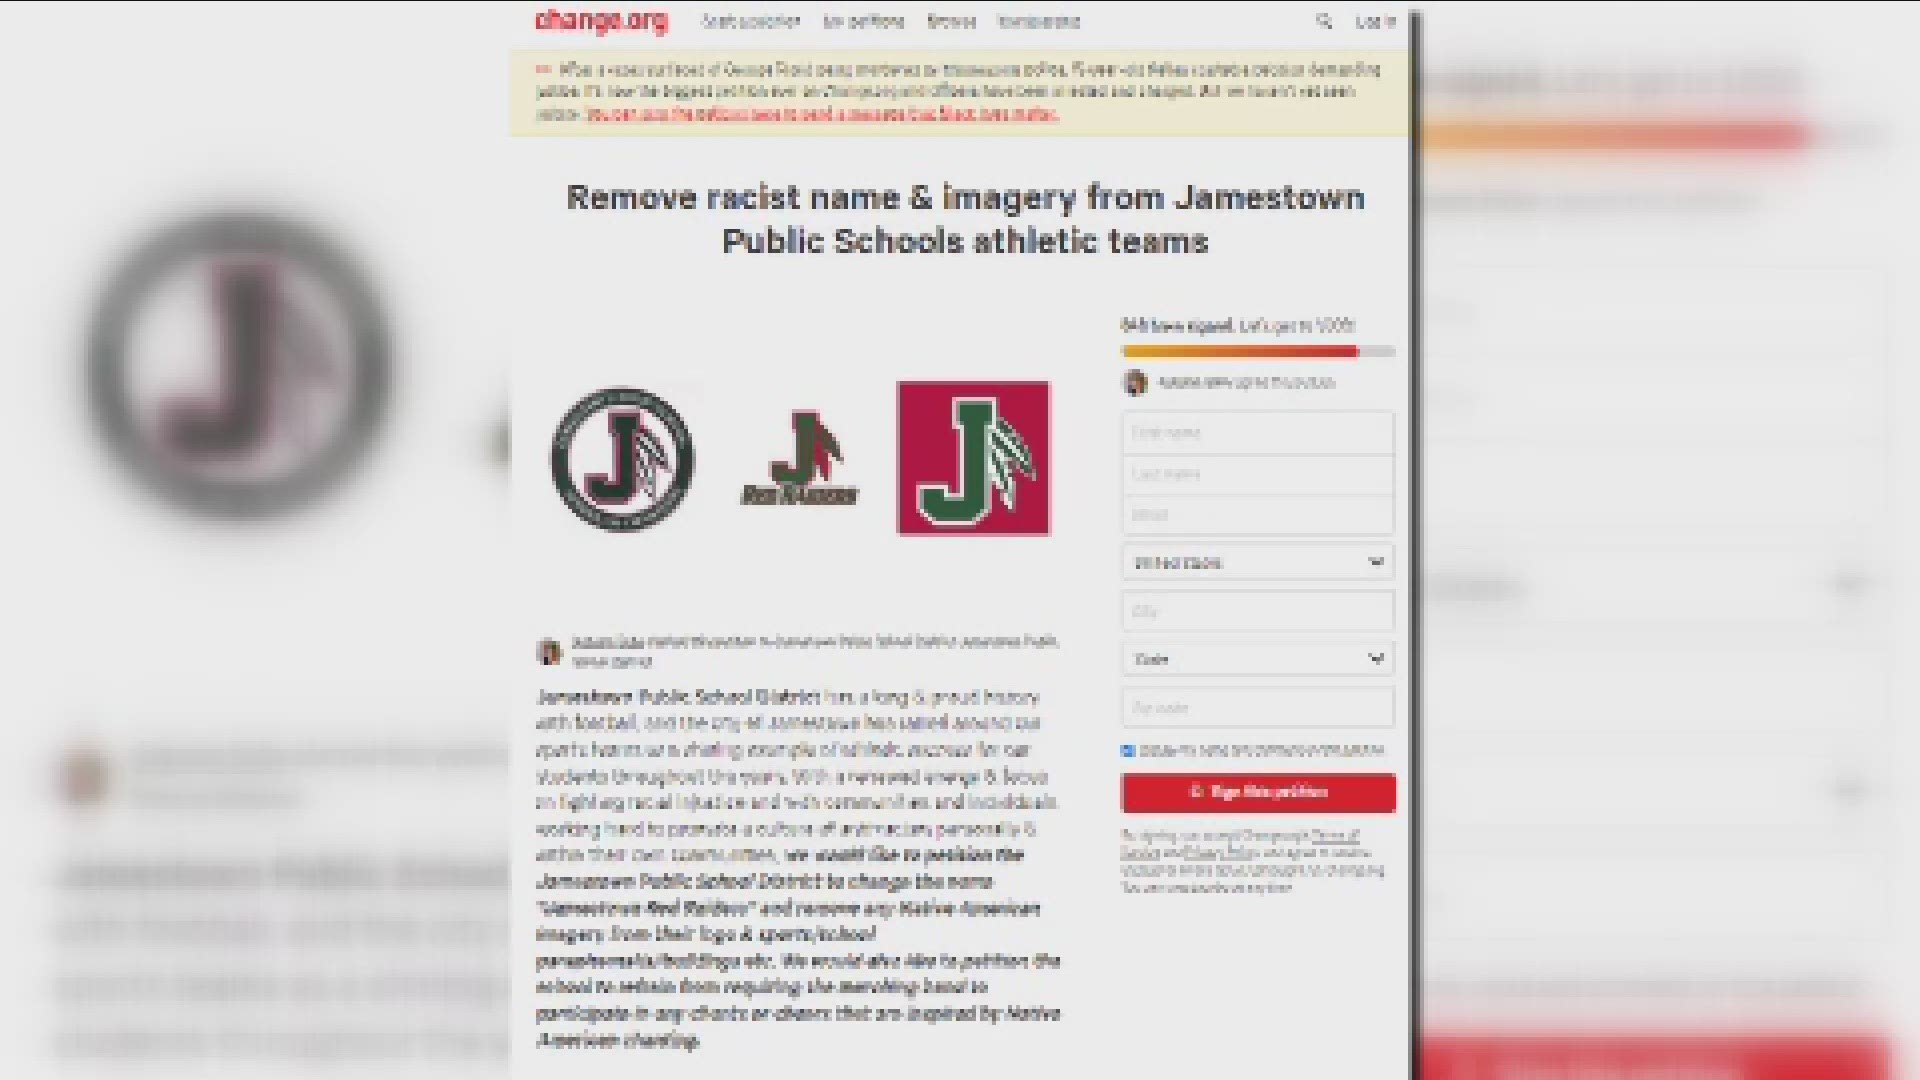 Proposal seeks to end race-based mascots